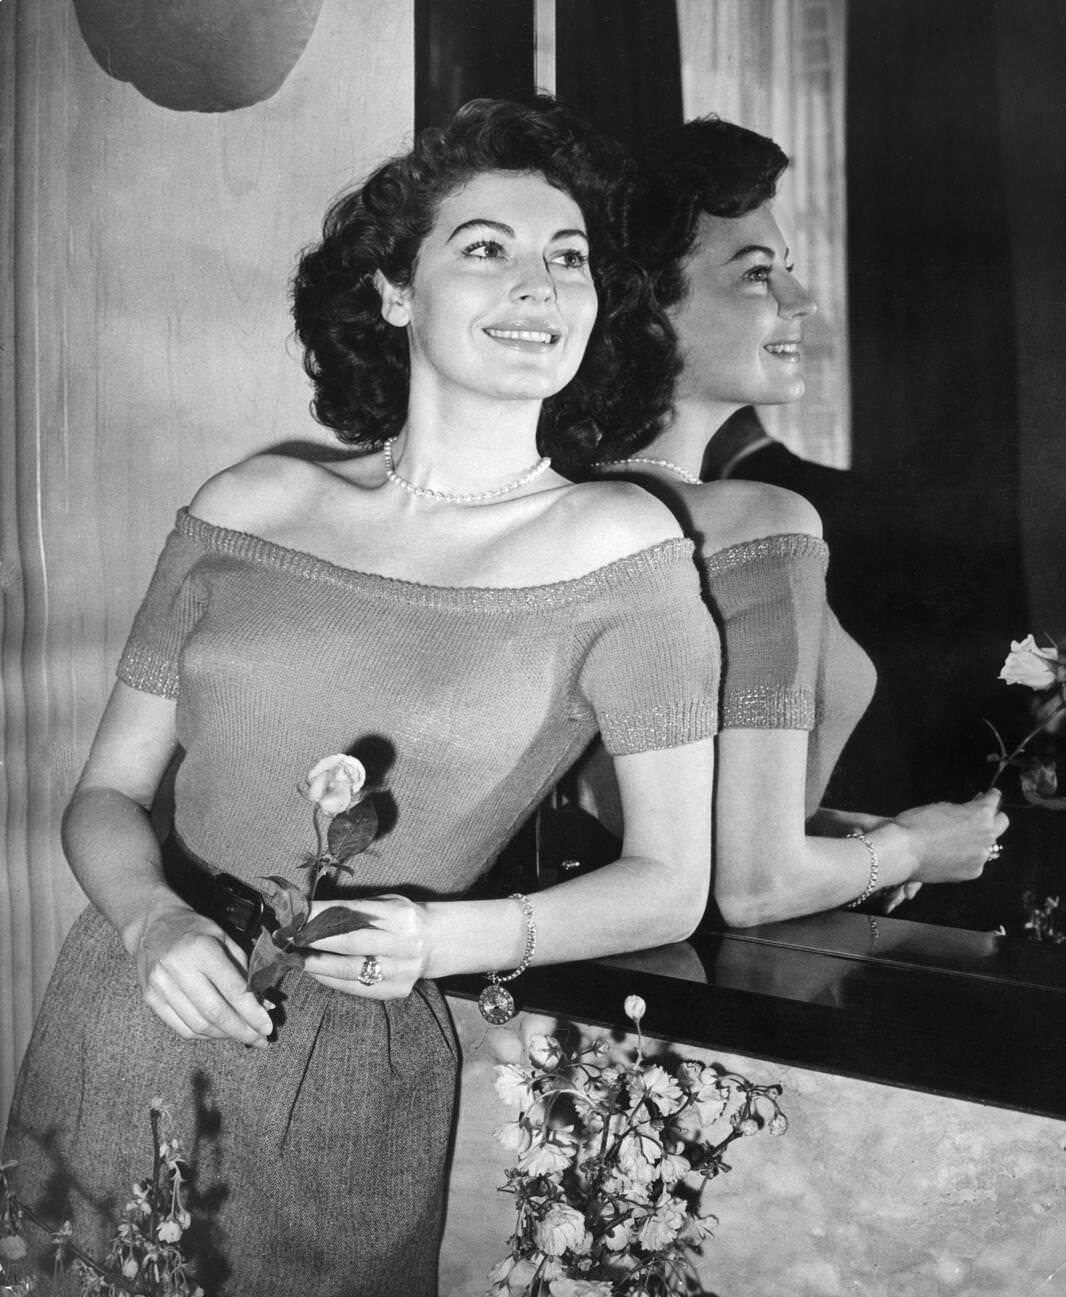 Ava Gardner portrait with rose, 1950, promoting "Pandora and the Flying Dutchman," released in 1951.